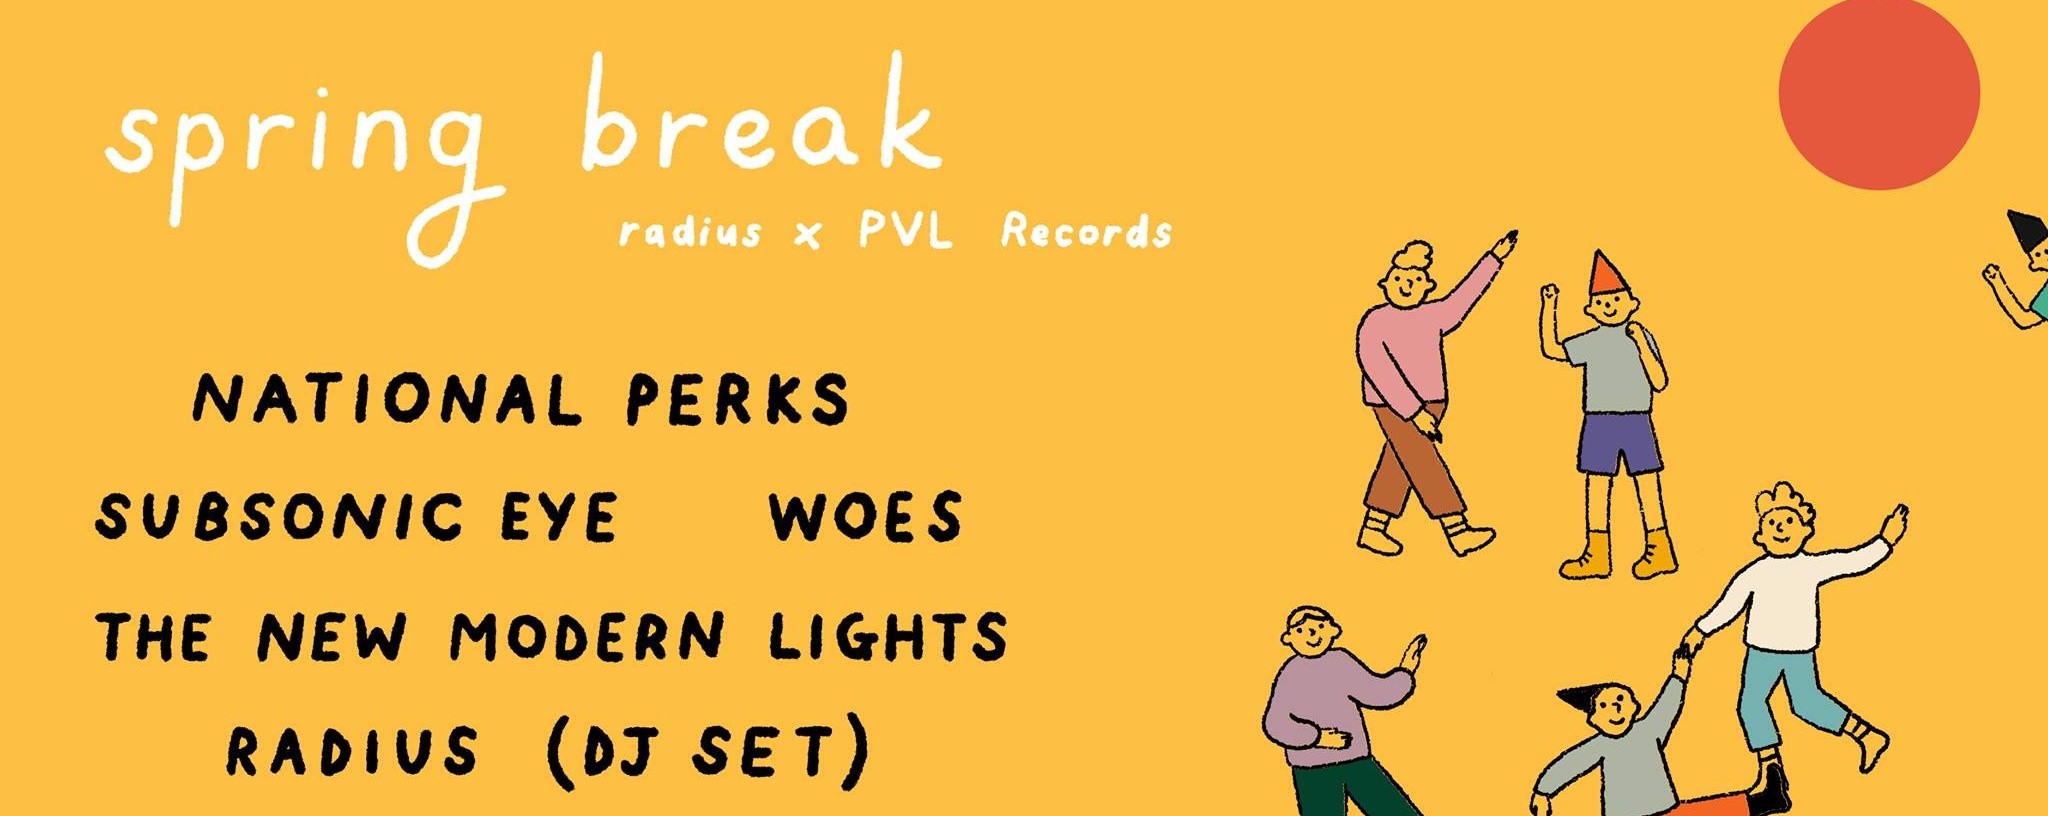 Spring Break (with PVL Records)